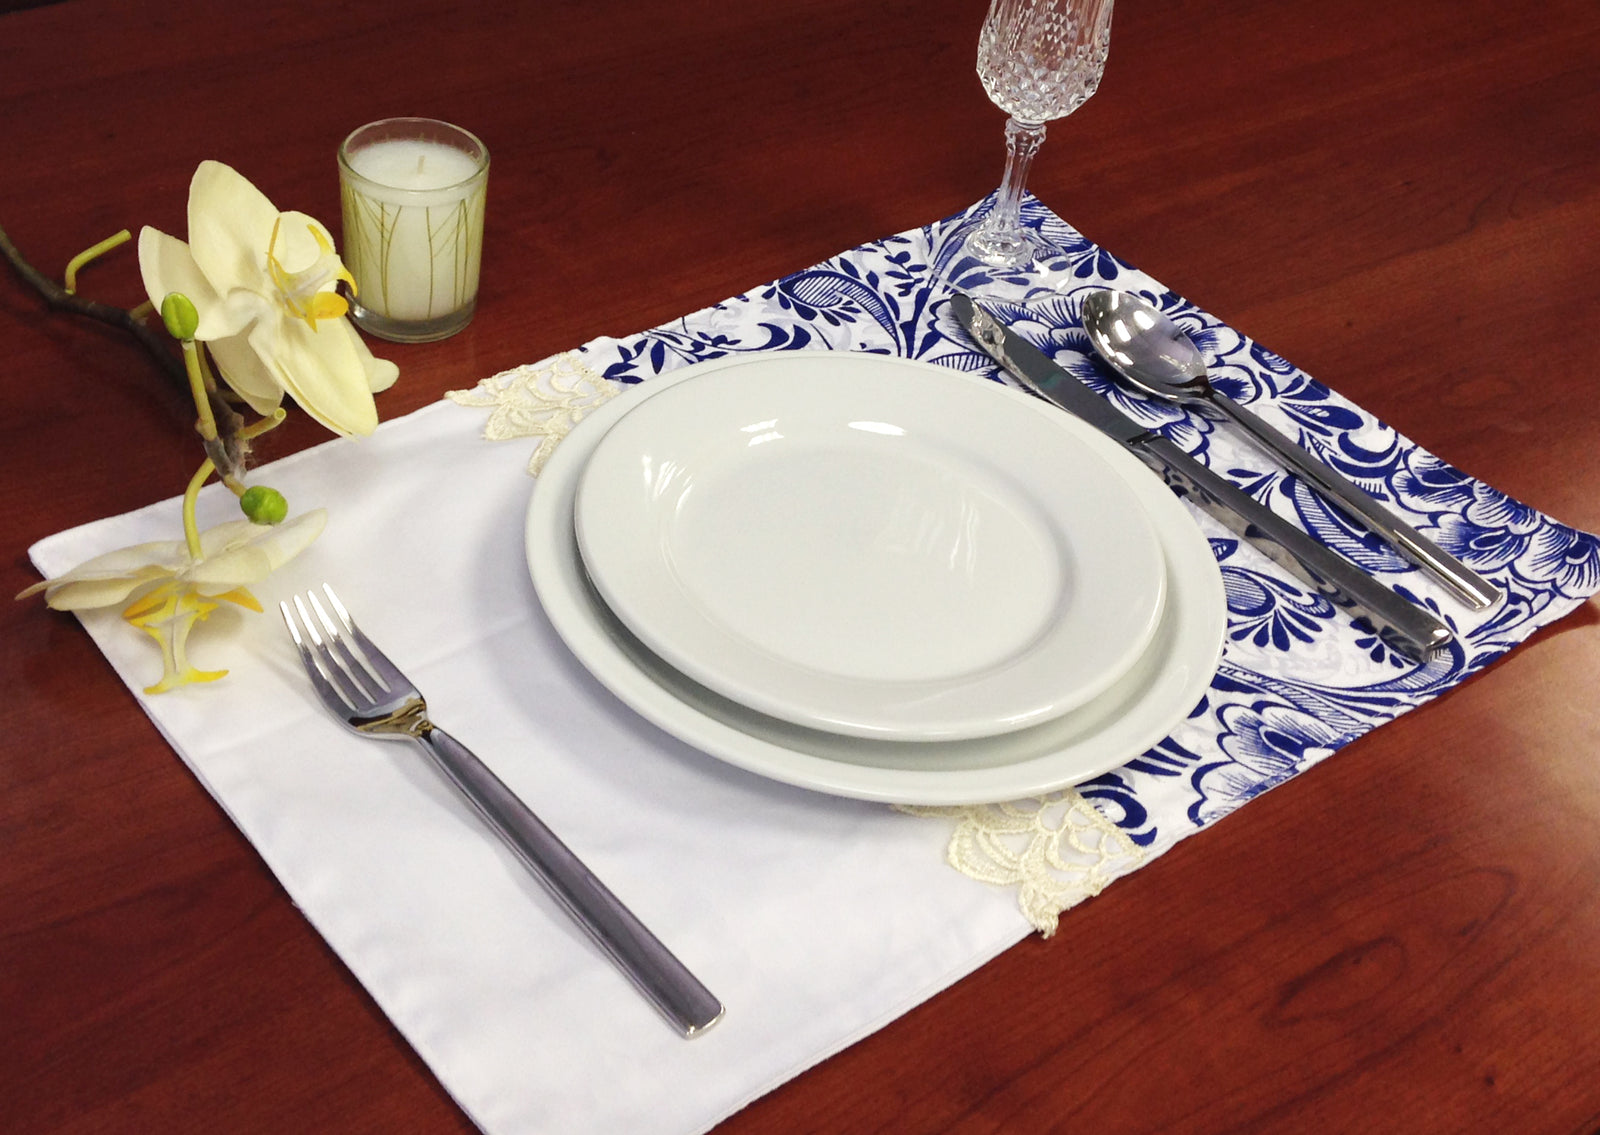 Wrapables Asian Blue Flower Placemats (Set of 4)